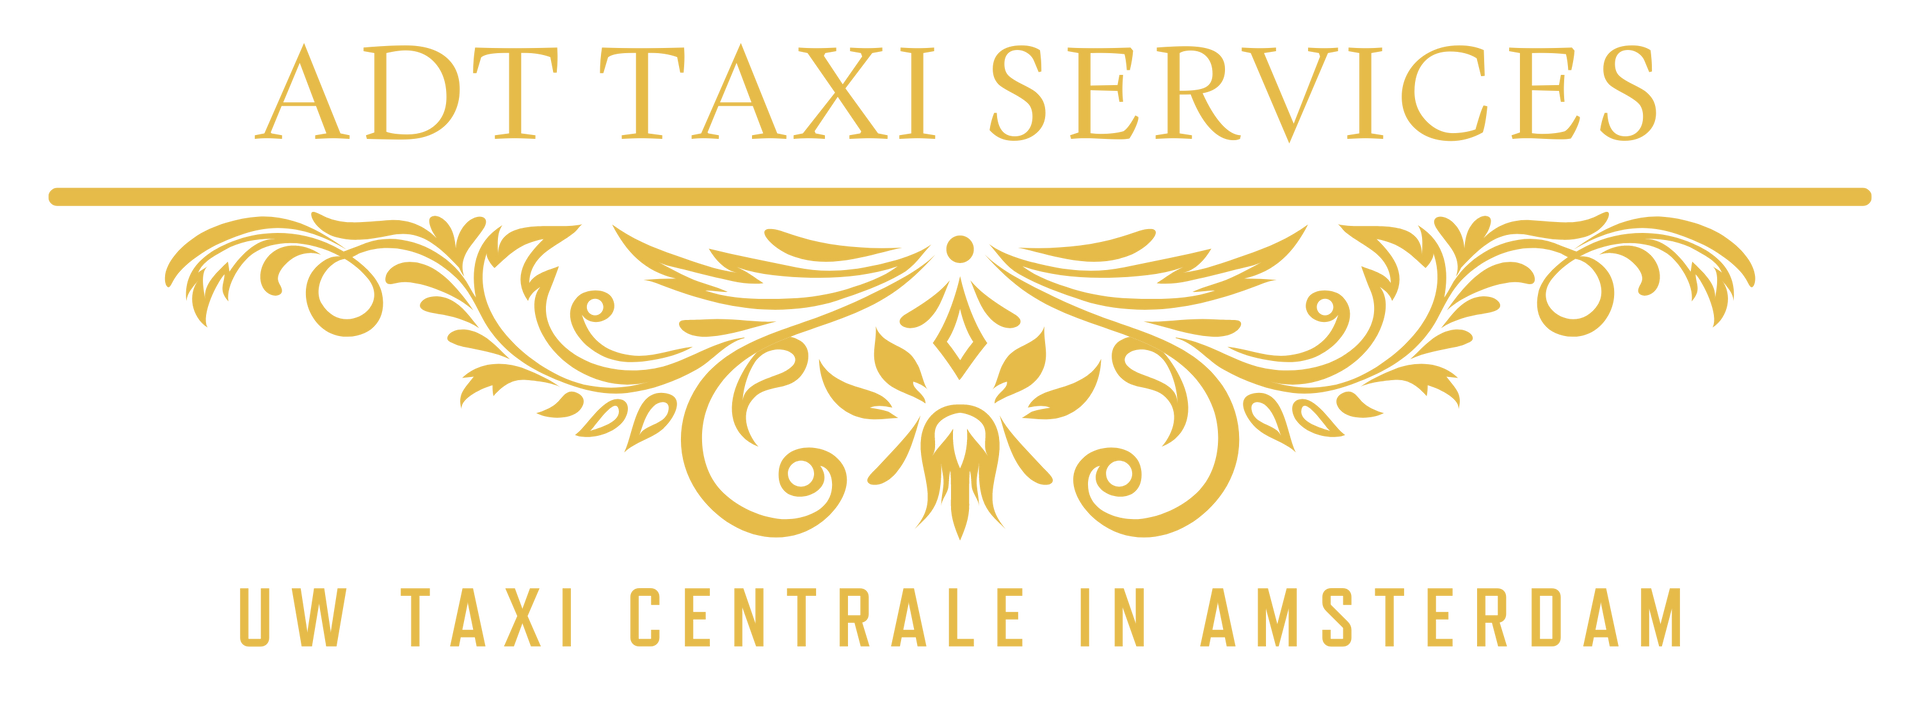 ADT Taxi Amsterdam Taxi Services